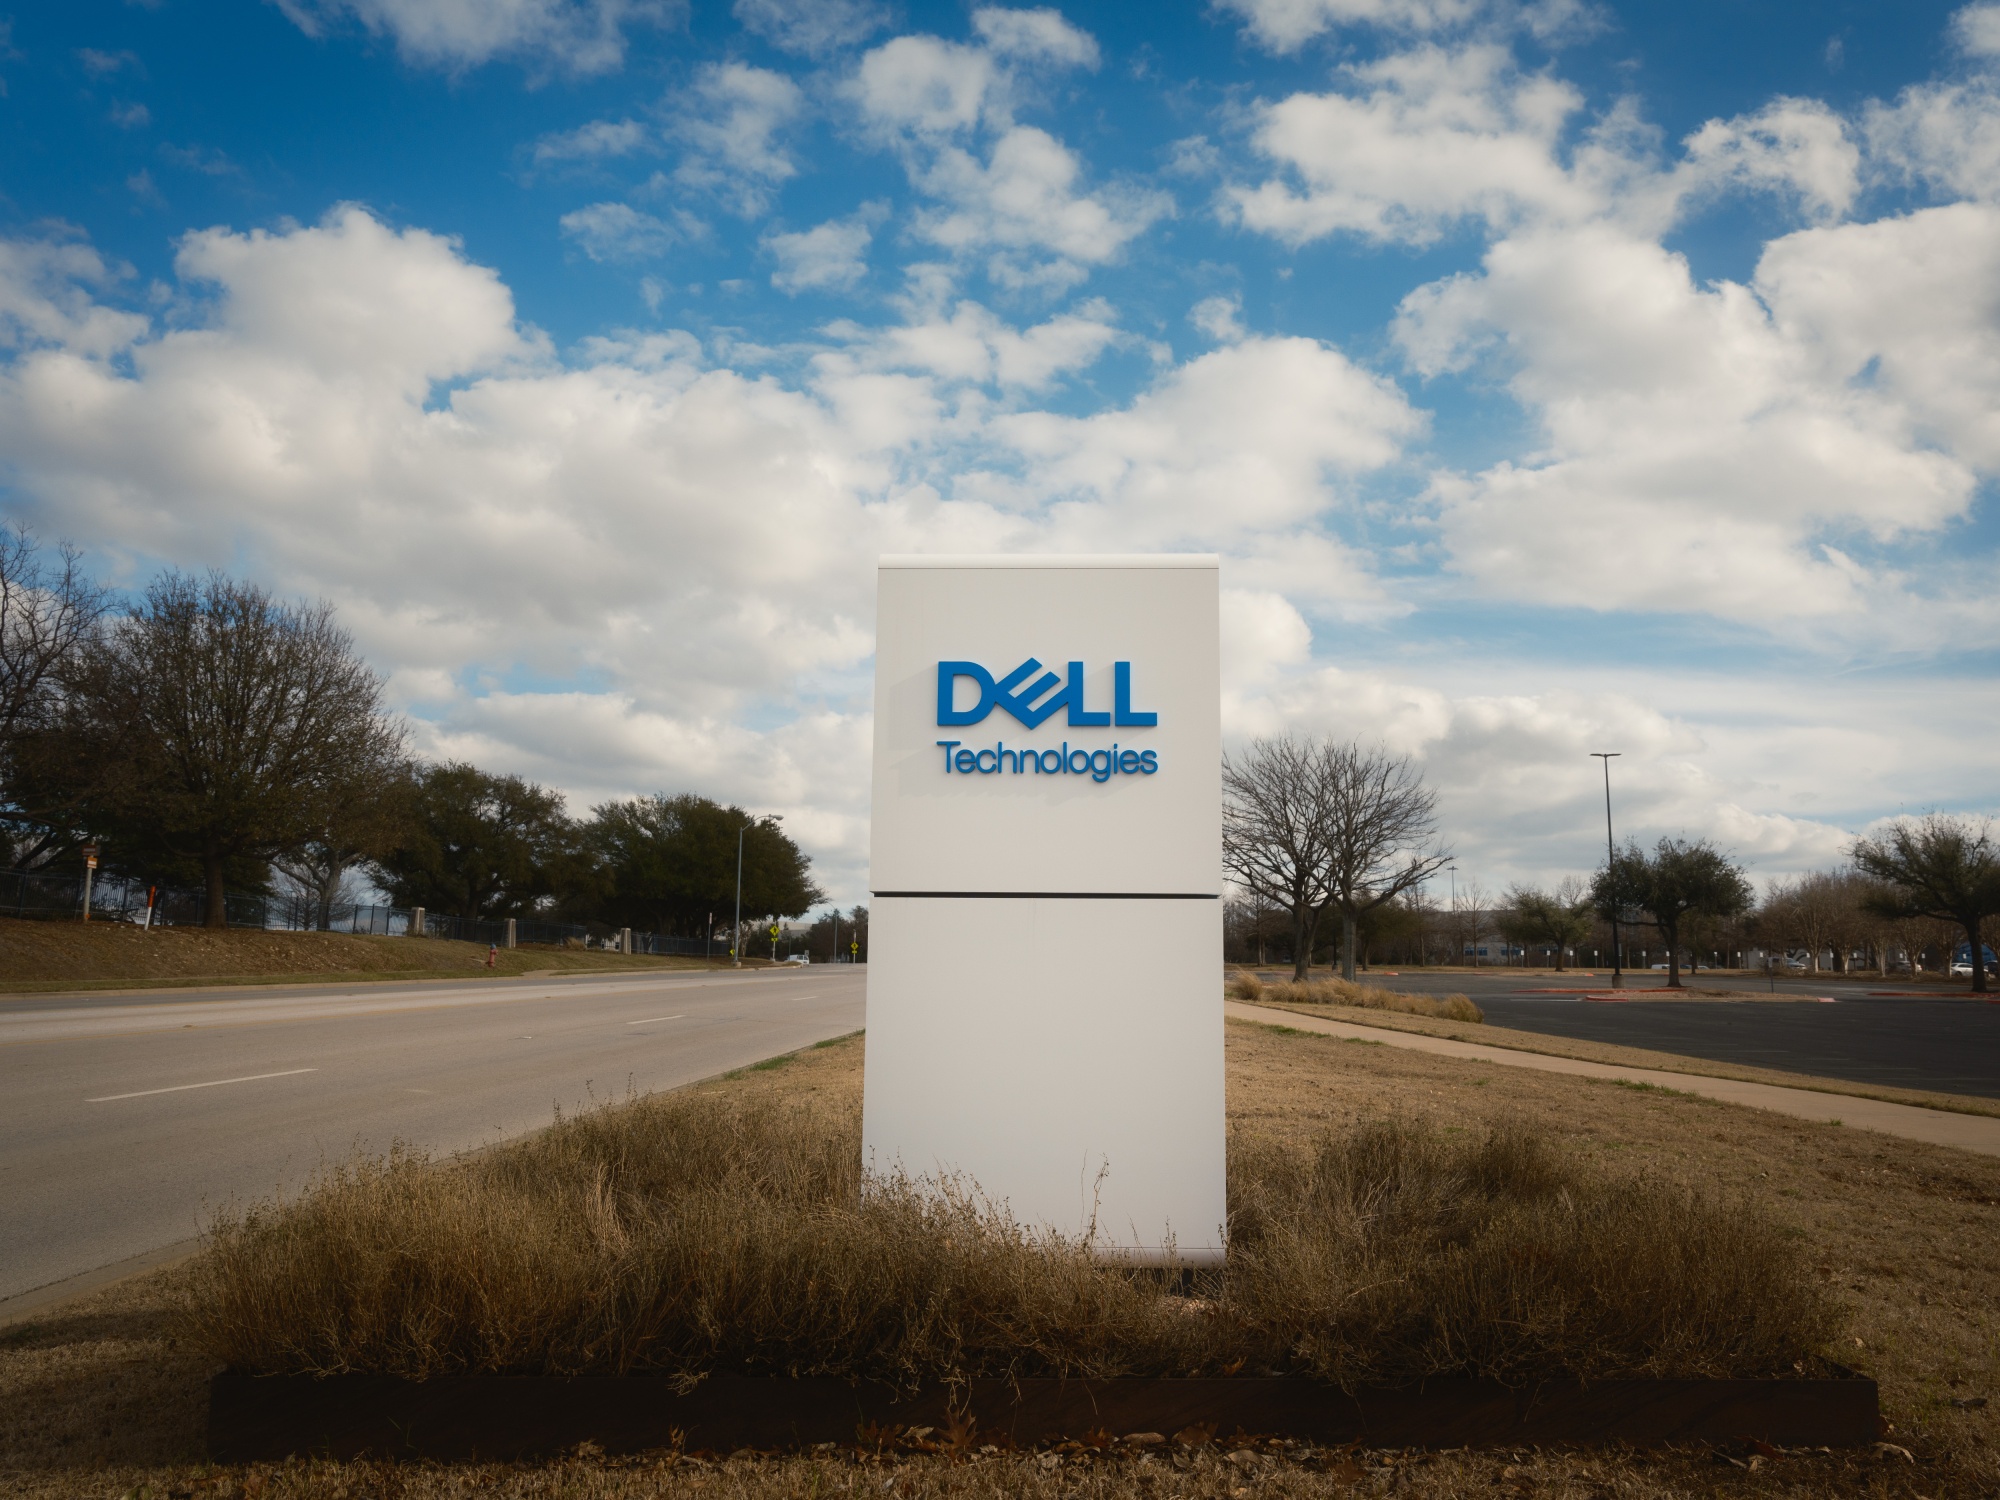 Dell Technologies headquarters in Round Rock, Texas.